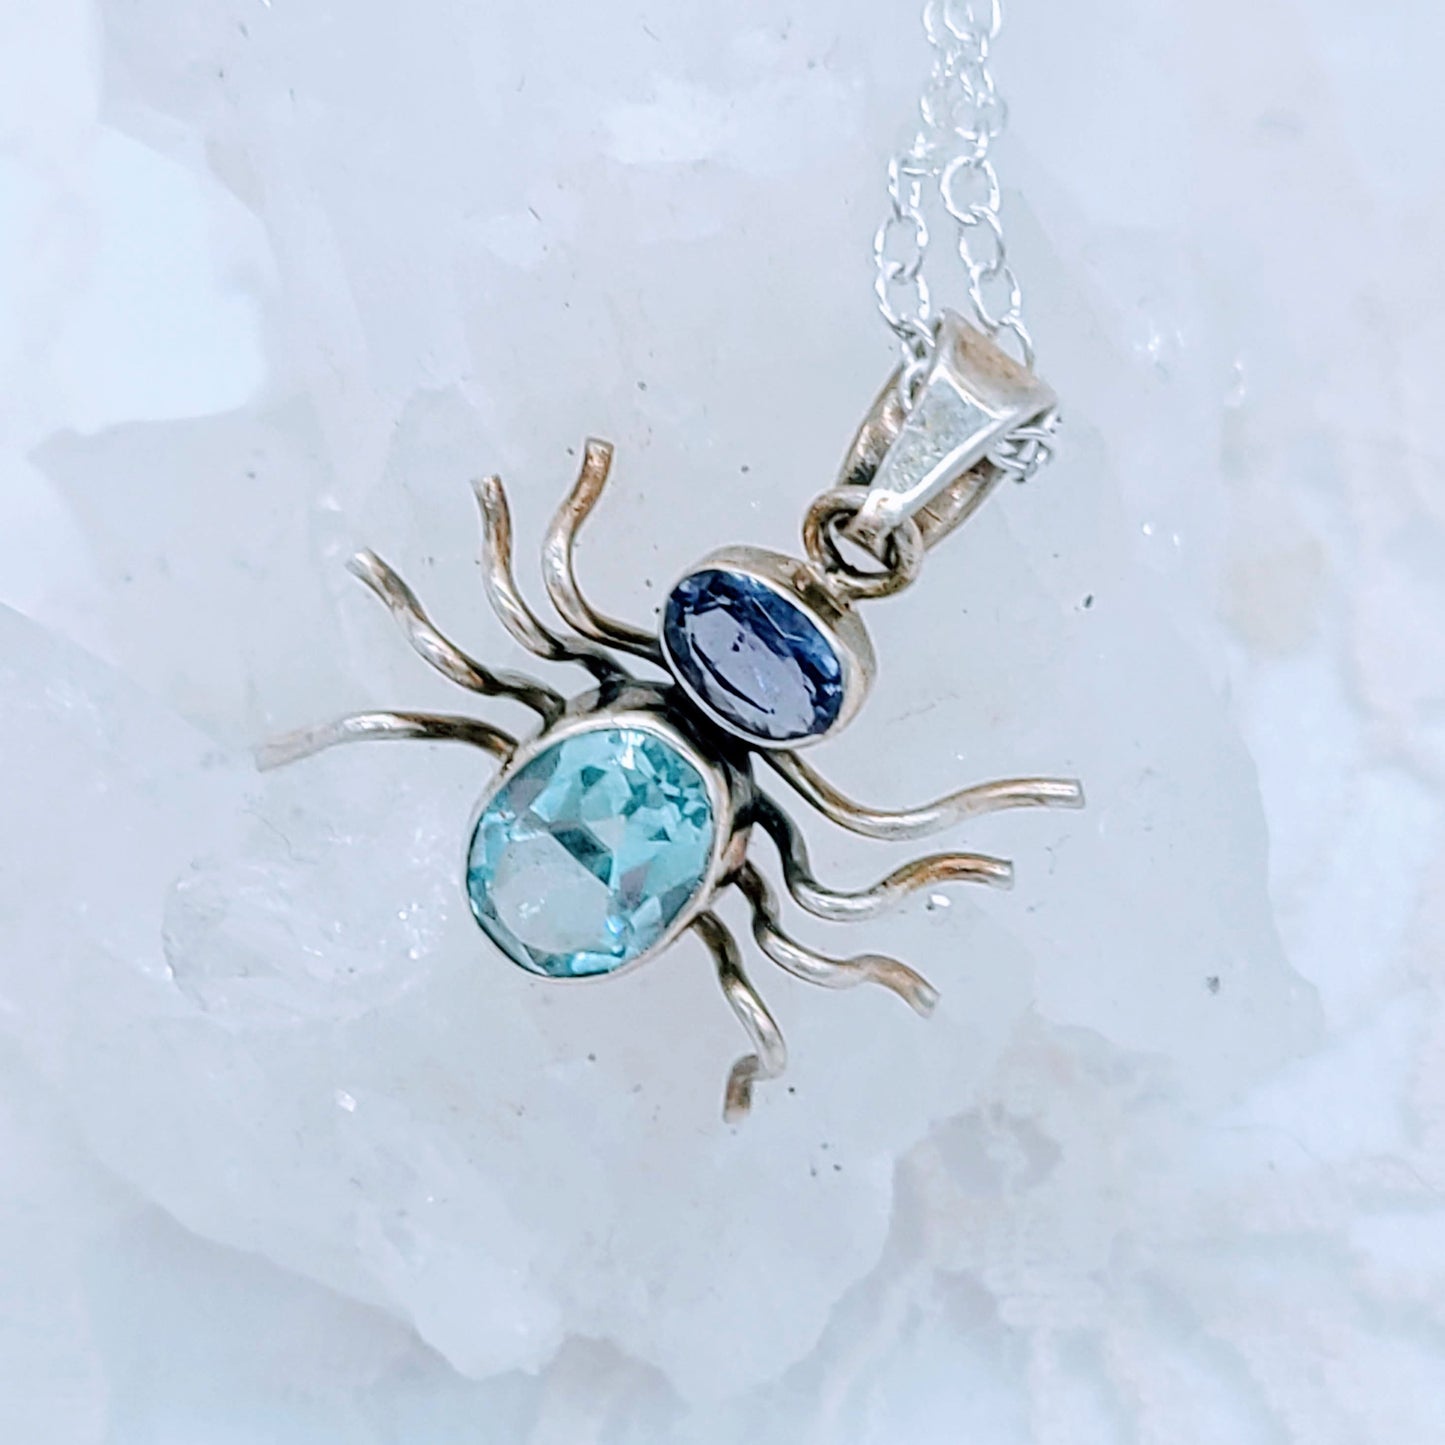 Wicked Weaver Spider Necklace ~ OOAK Artist Made Aquamarine and Amethyst Sterling Sterling Silver Necklace ~ 925 Sterling ~ On 17" Chain